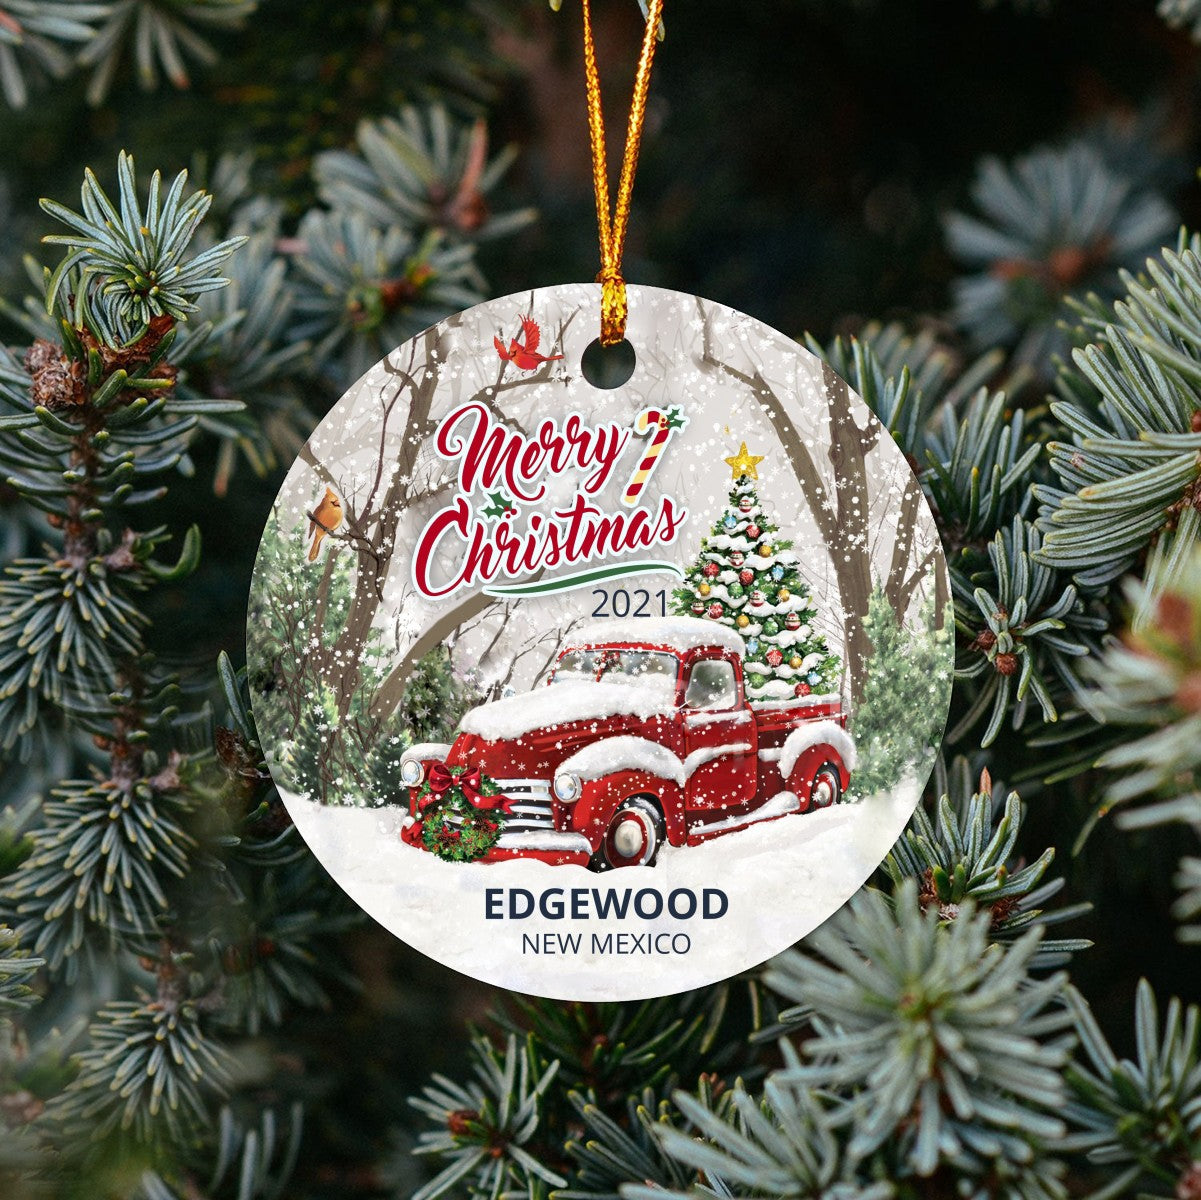 Christmas Tree Ornaments Edgewood - Ornament With Name City, State Edgewood New Mexico NM Ornament - Red Truck Xmas Ornaments 3'' Plastic Gift For Family, Friend And Housewarming